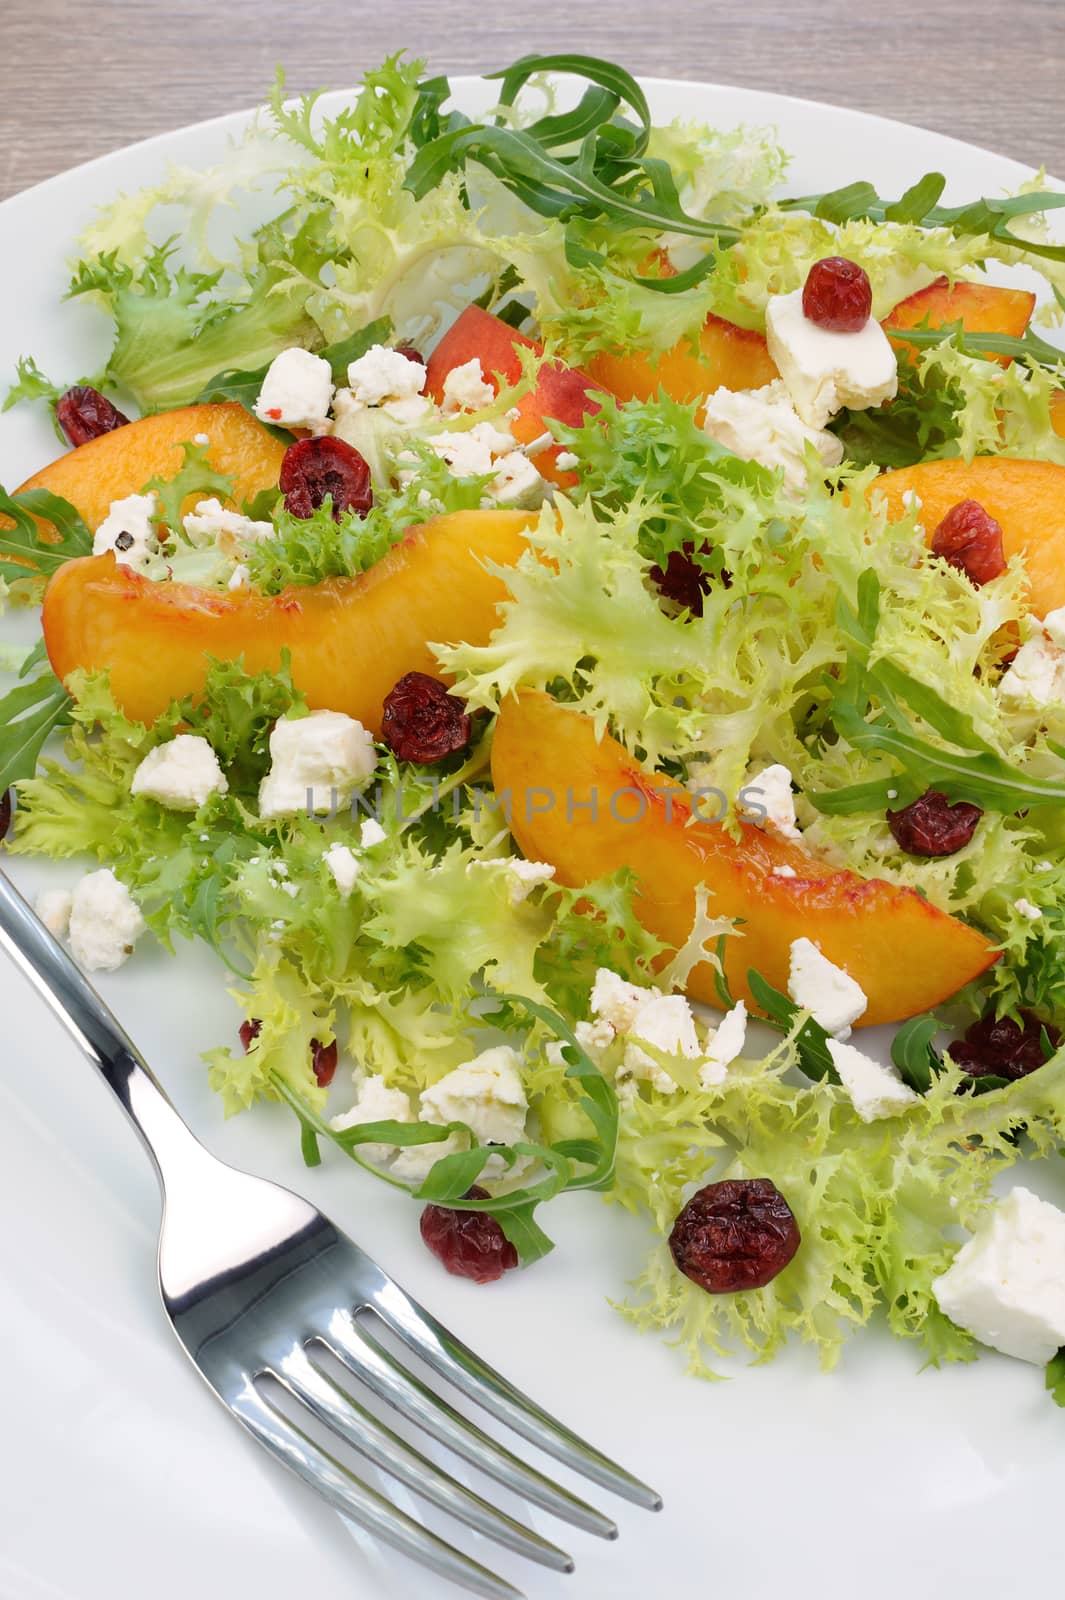 Salad of lettuce and arugula with peaches, feta cheese, cranberries